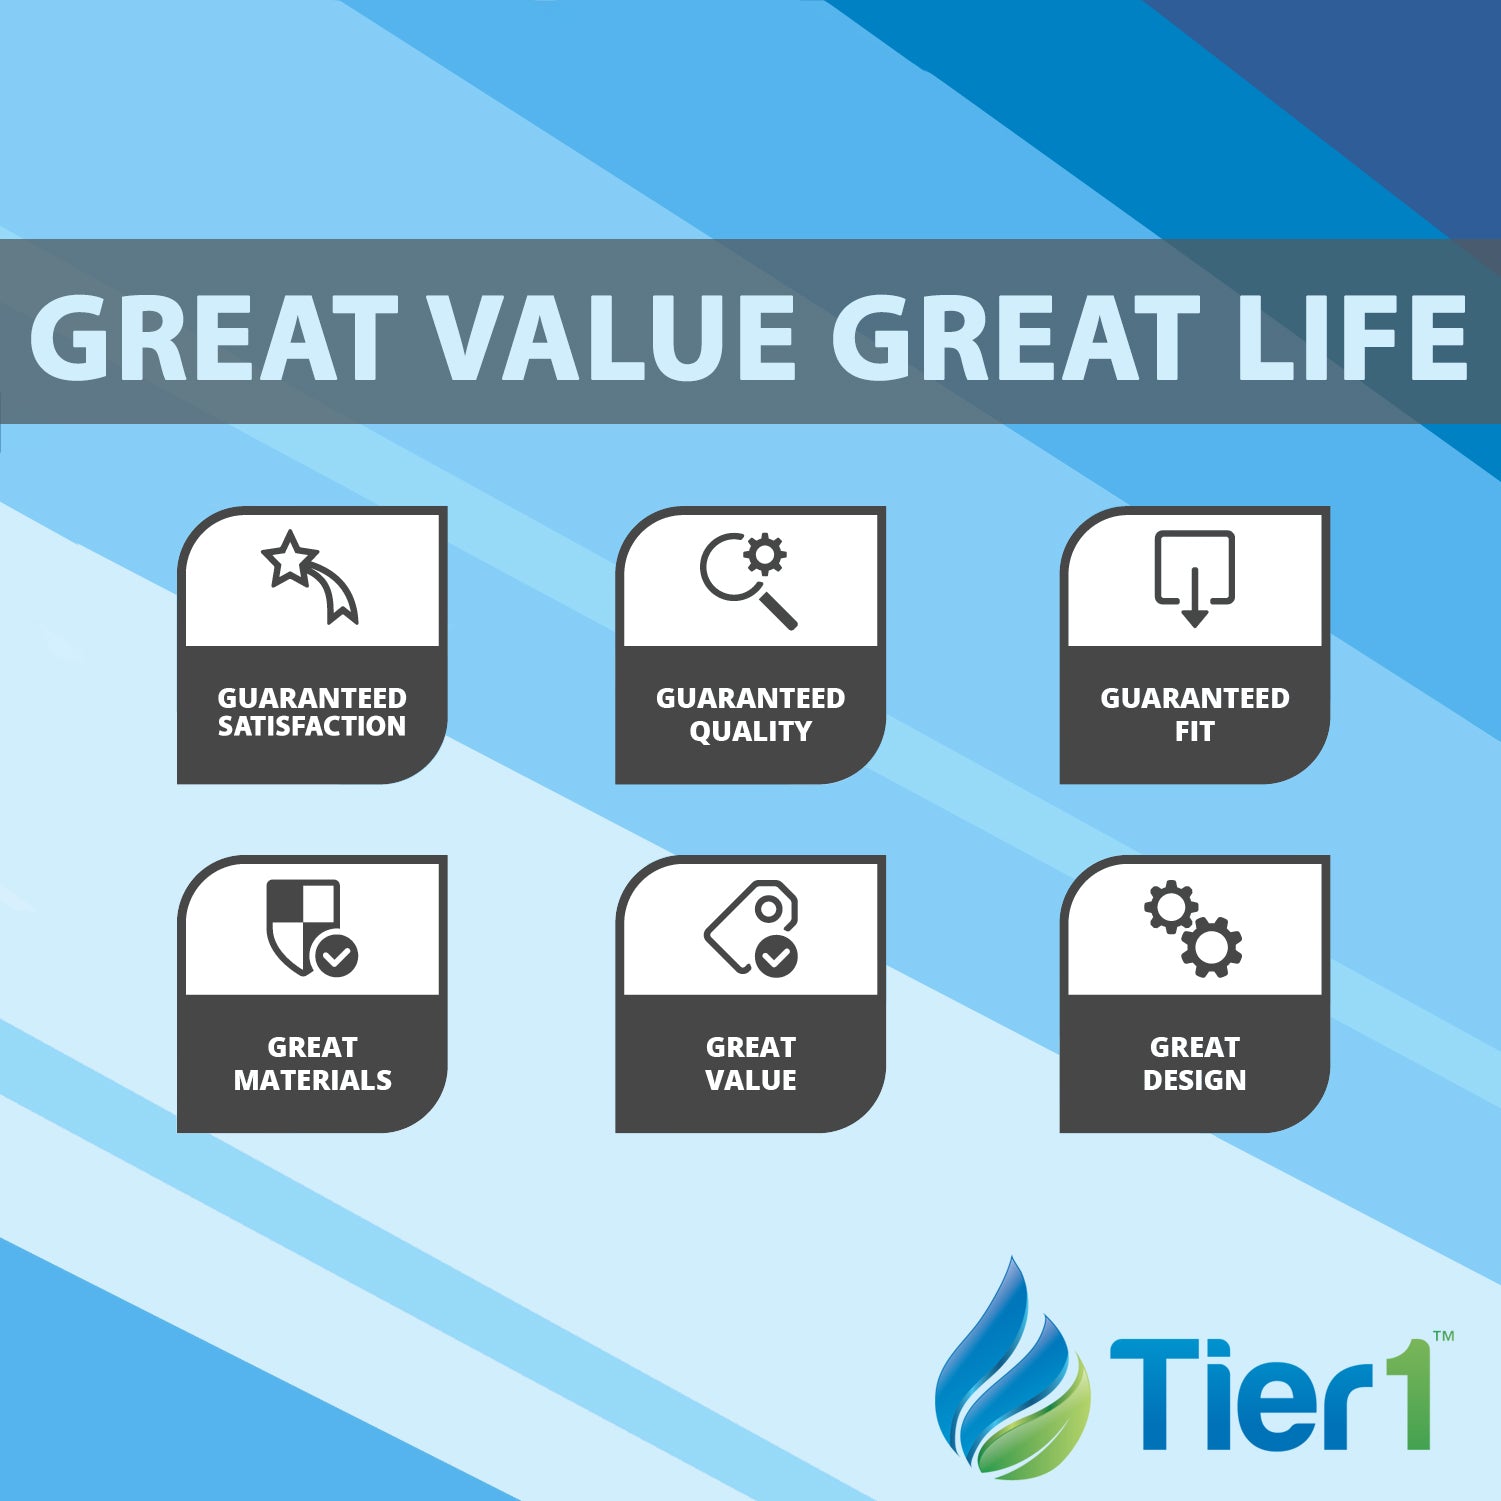 Tier1 brand replacement for 03FIL1600 (Great Water Great Life)